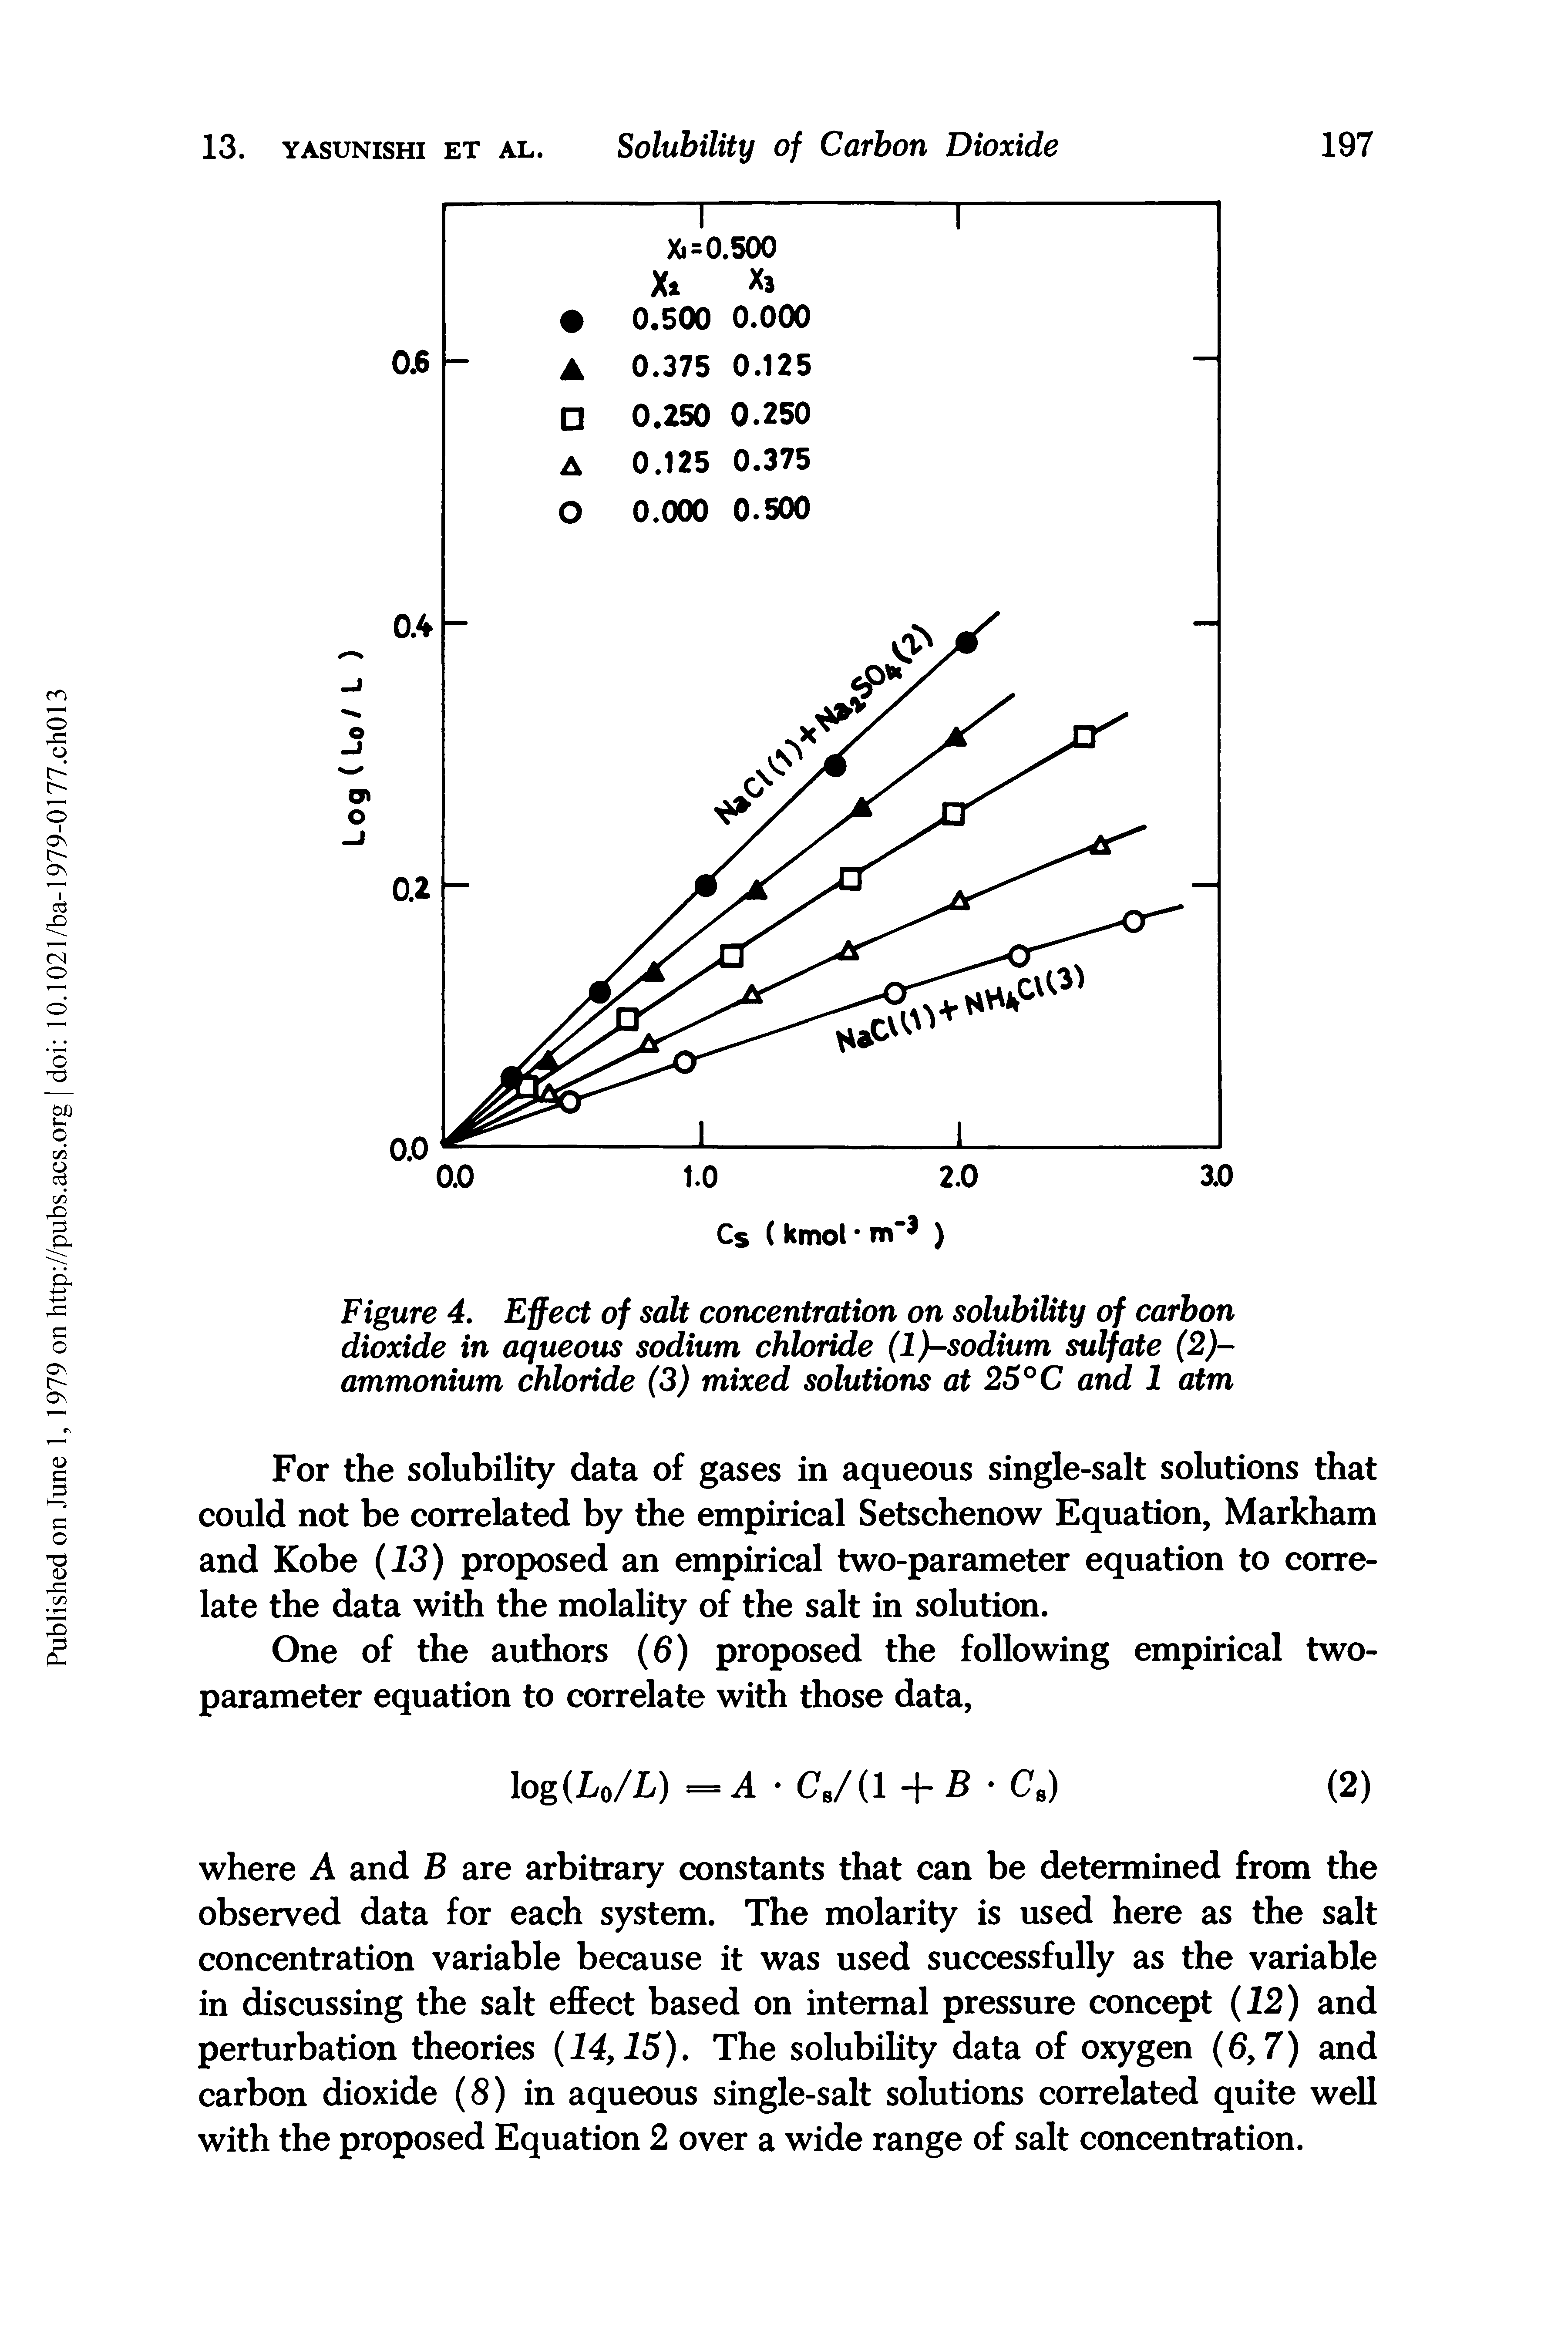 Figure 4. Effect of salt concentration on solubility of carbon dioxide in aqueous sodium chloride (l)-sodium sulfate (2)-ammonium chloride (3) mixed solutions at 25° C and 1 atm...